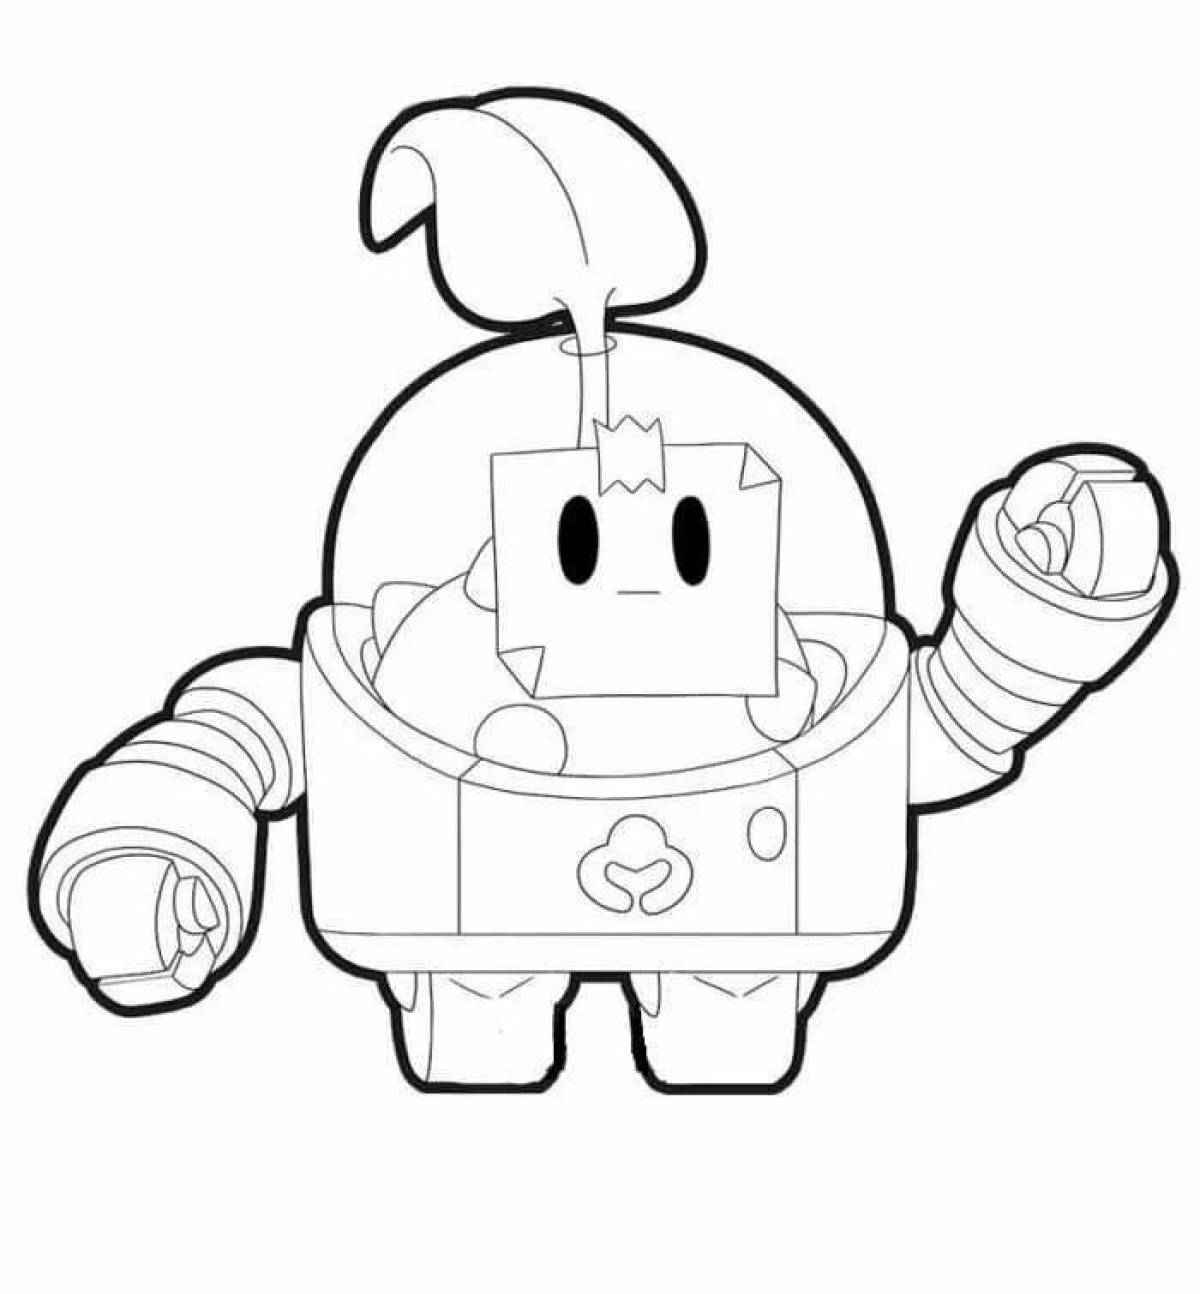 Animated coloring book fan from brawl stars